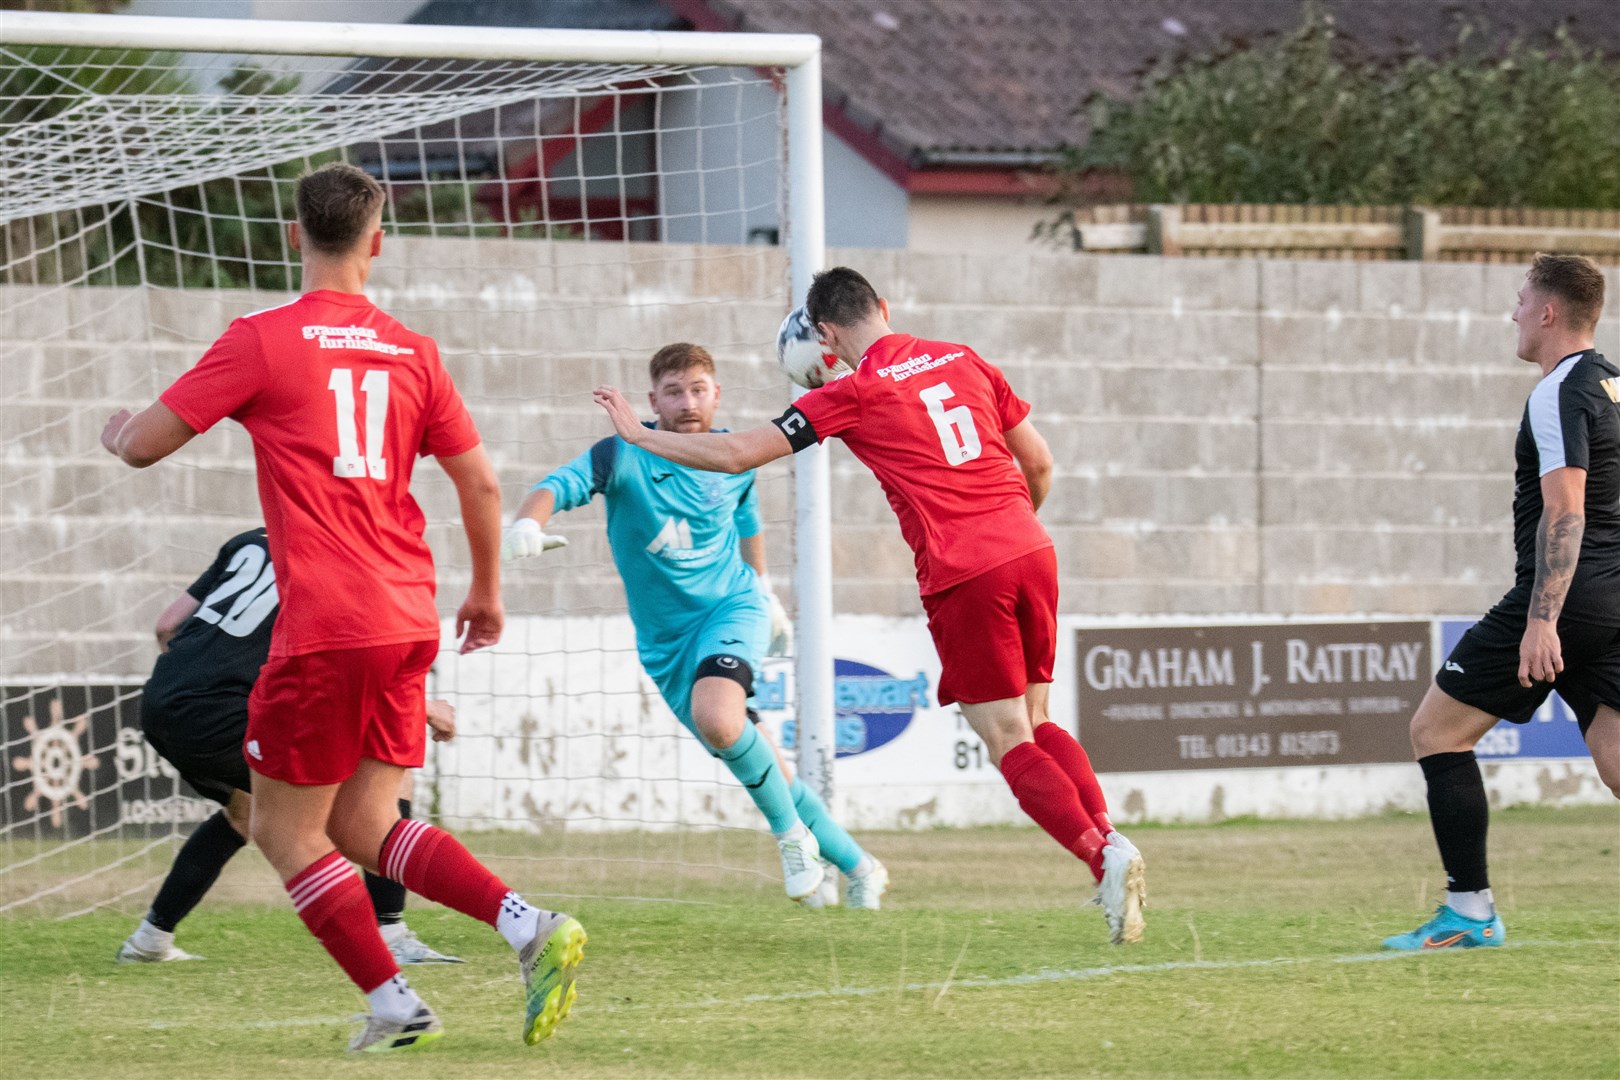 Lossiemouth captain Liam Archibald (#6) heads home the opener for the home side. ..Lossiemouth FC (4) vs Strathspey Thistle (2) - Highland Football League 22/23 - Grant Park, Lossiemouth 24/08/2022...Picture: Daniel Forsyth..